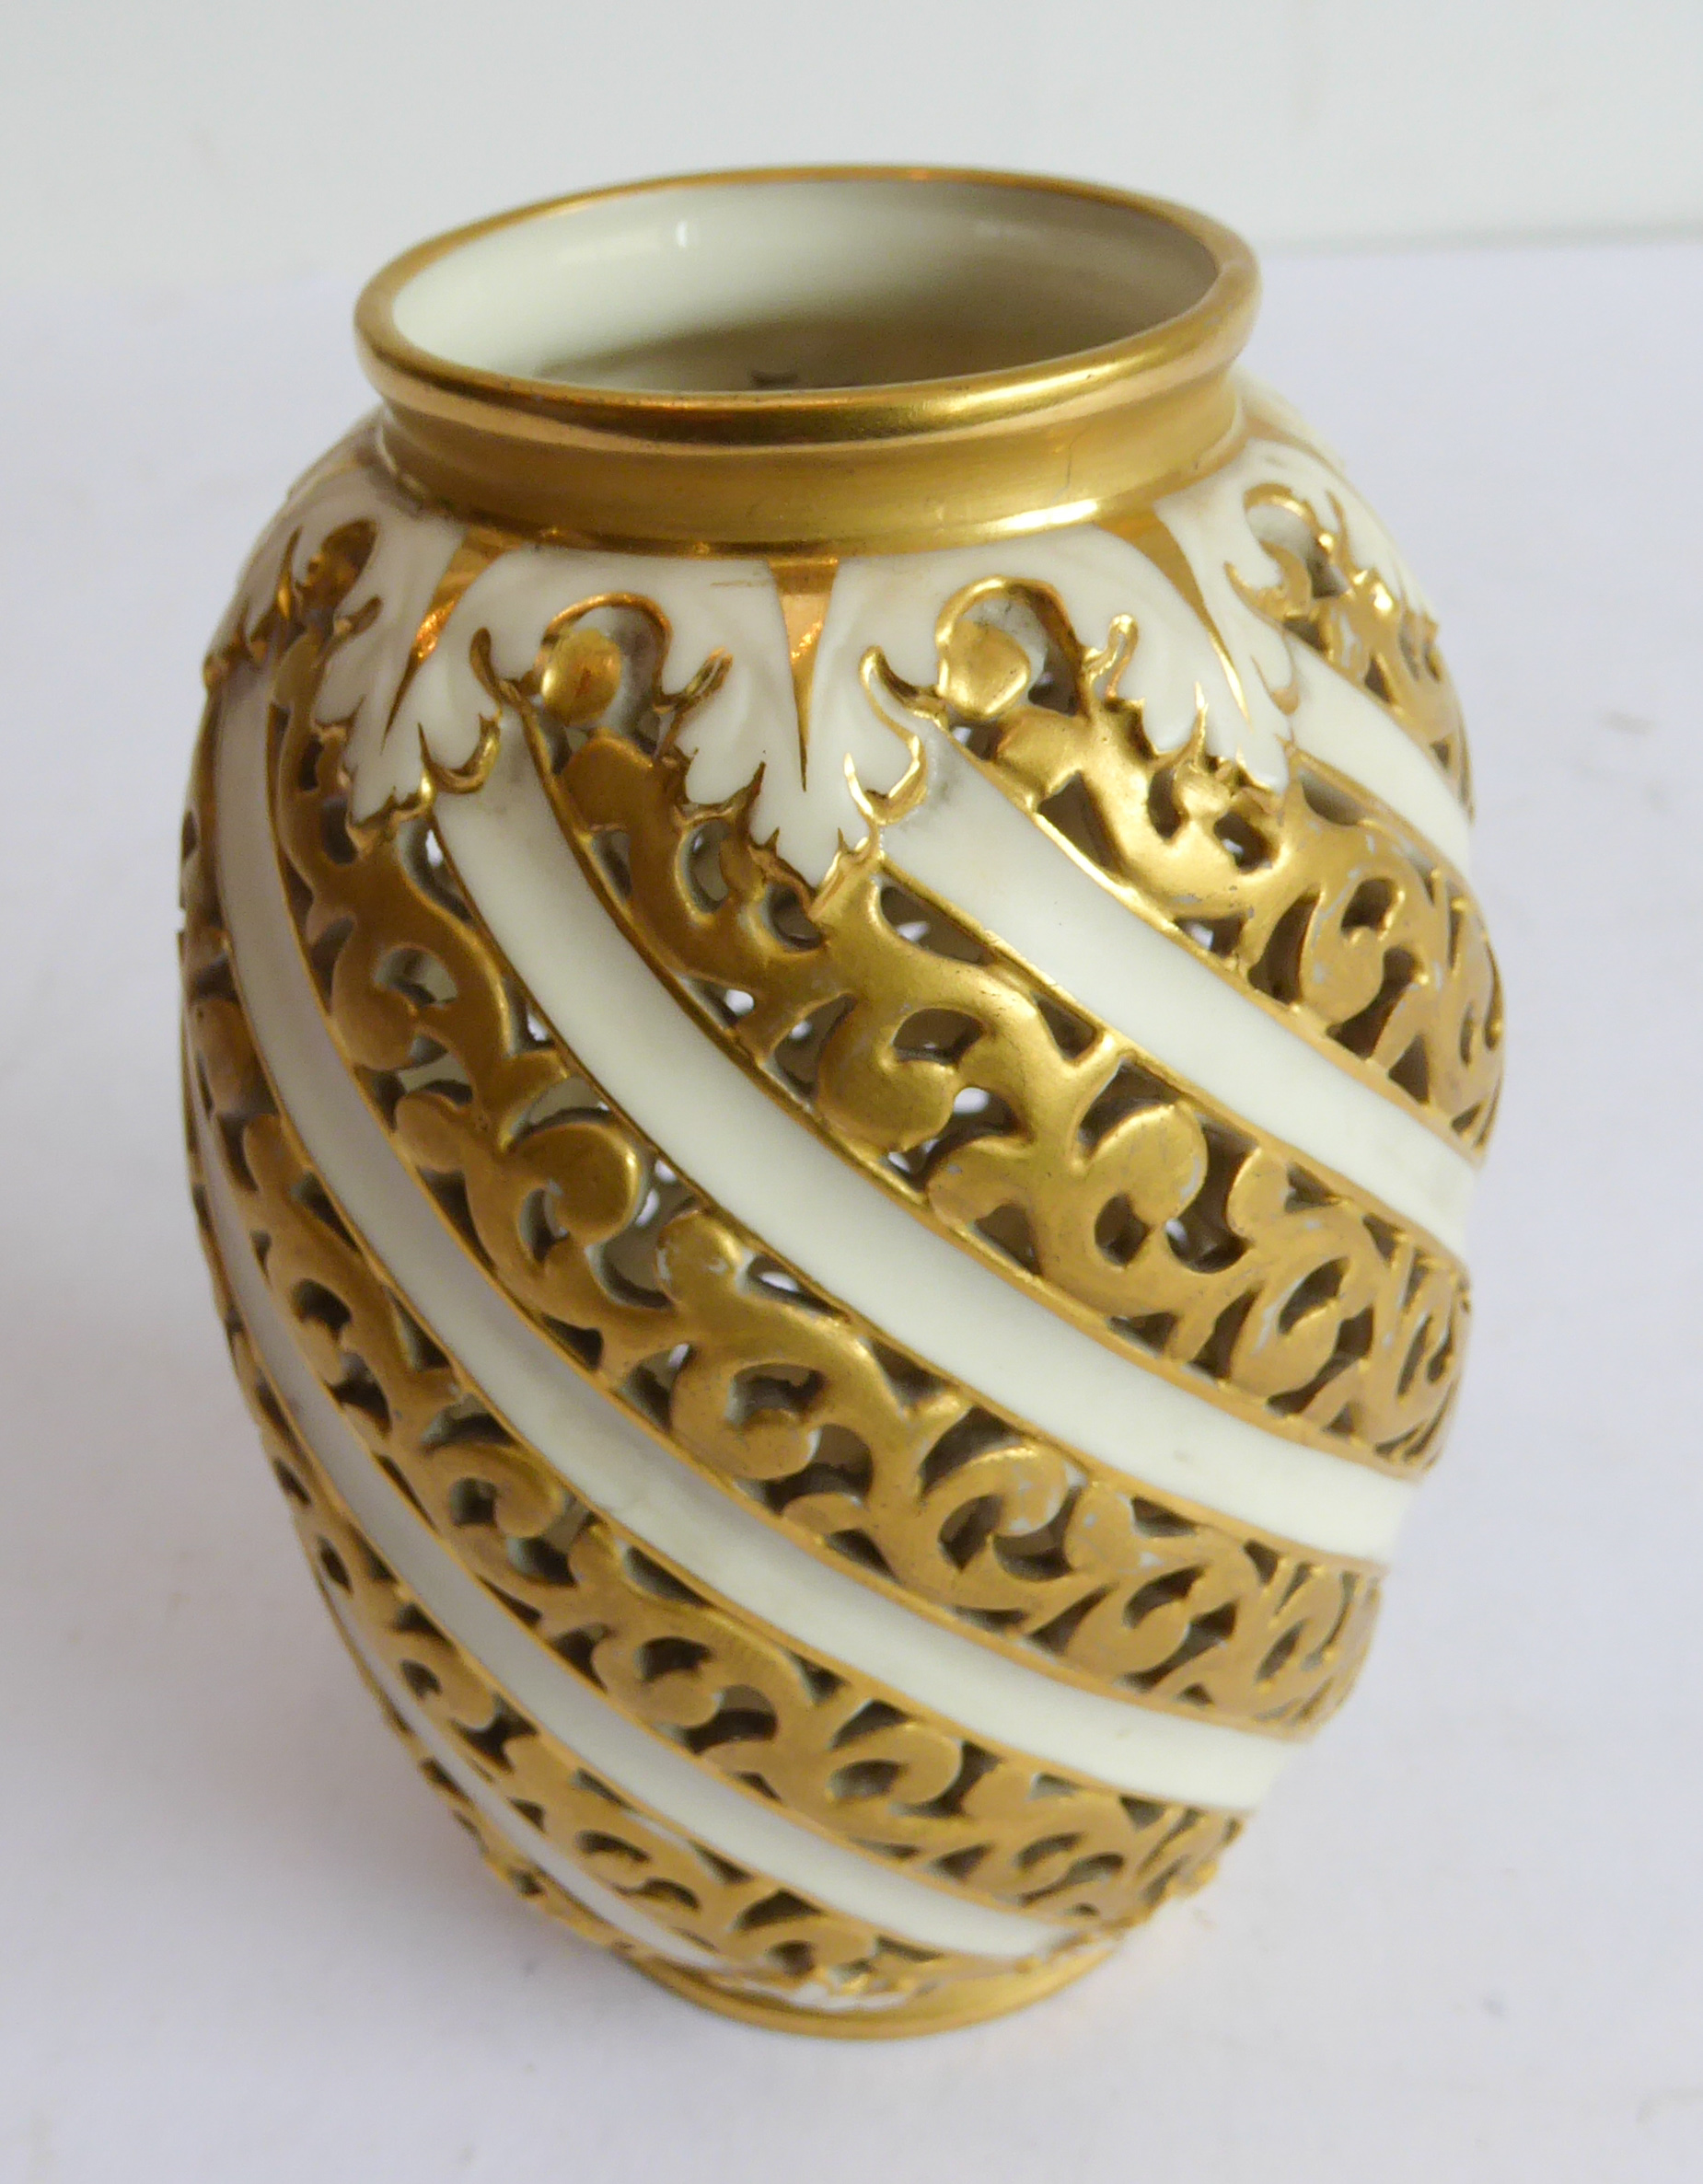 A late 19th century Royal Worcester China Works gilt-highlighted and reticulated porcelain vase,